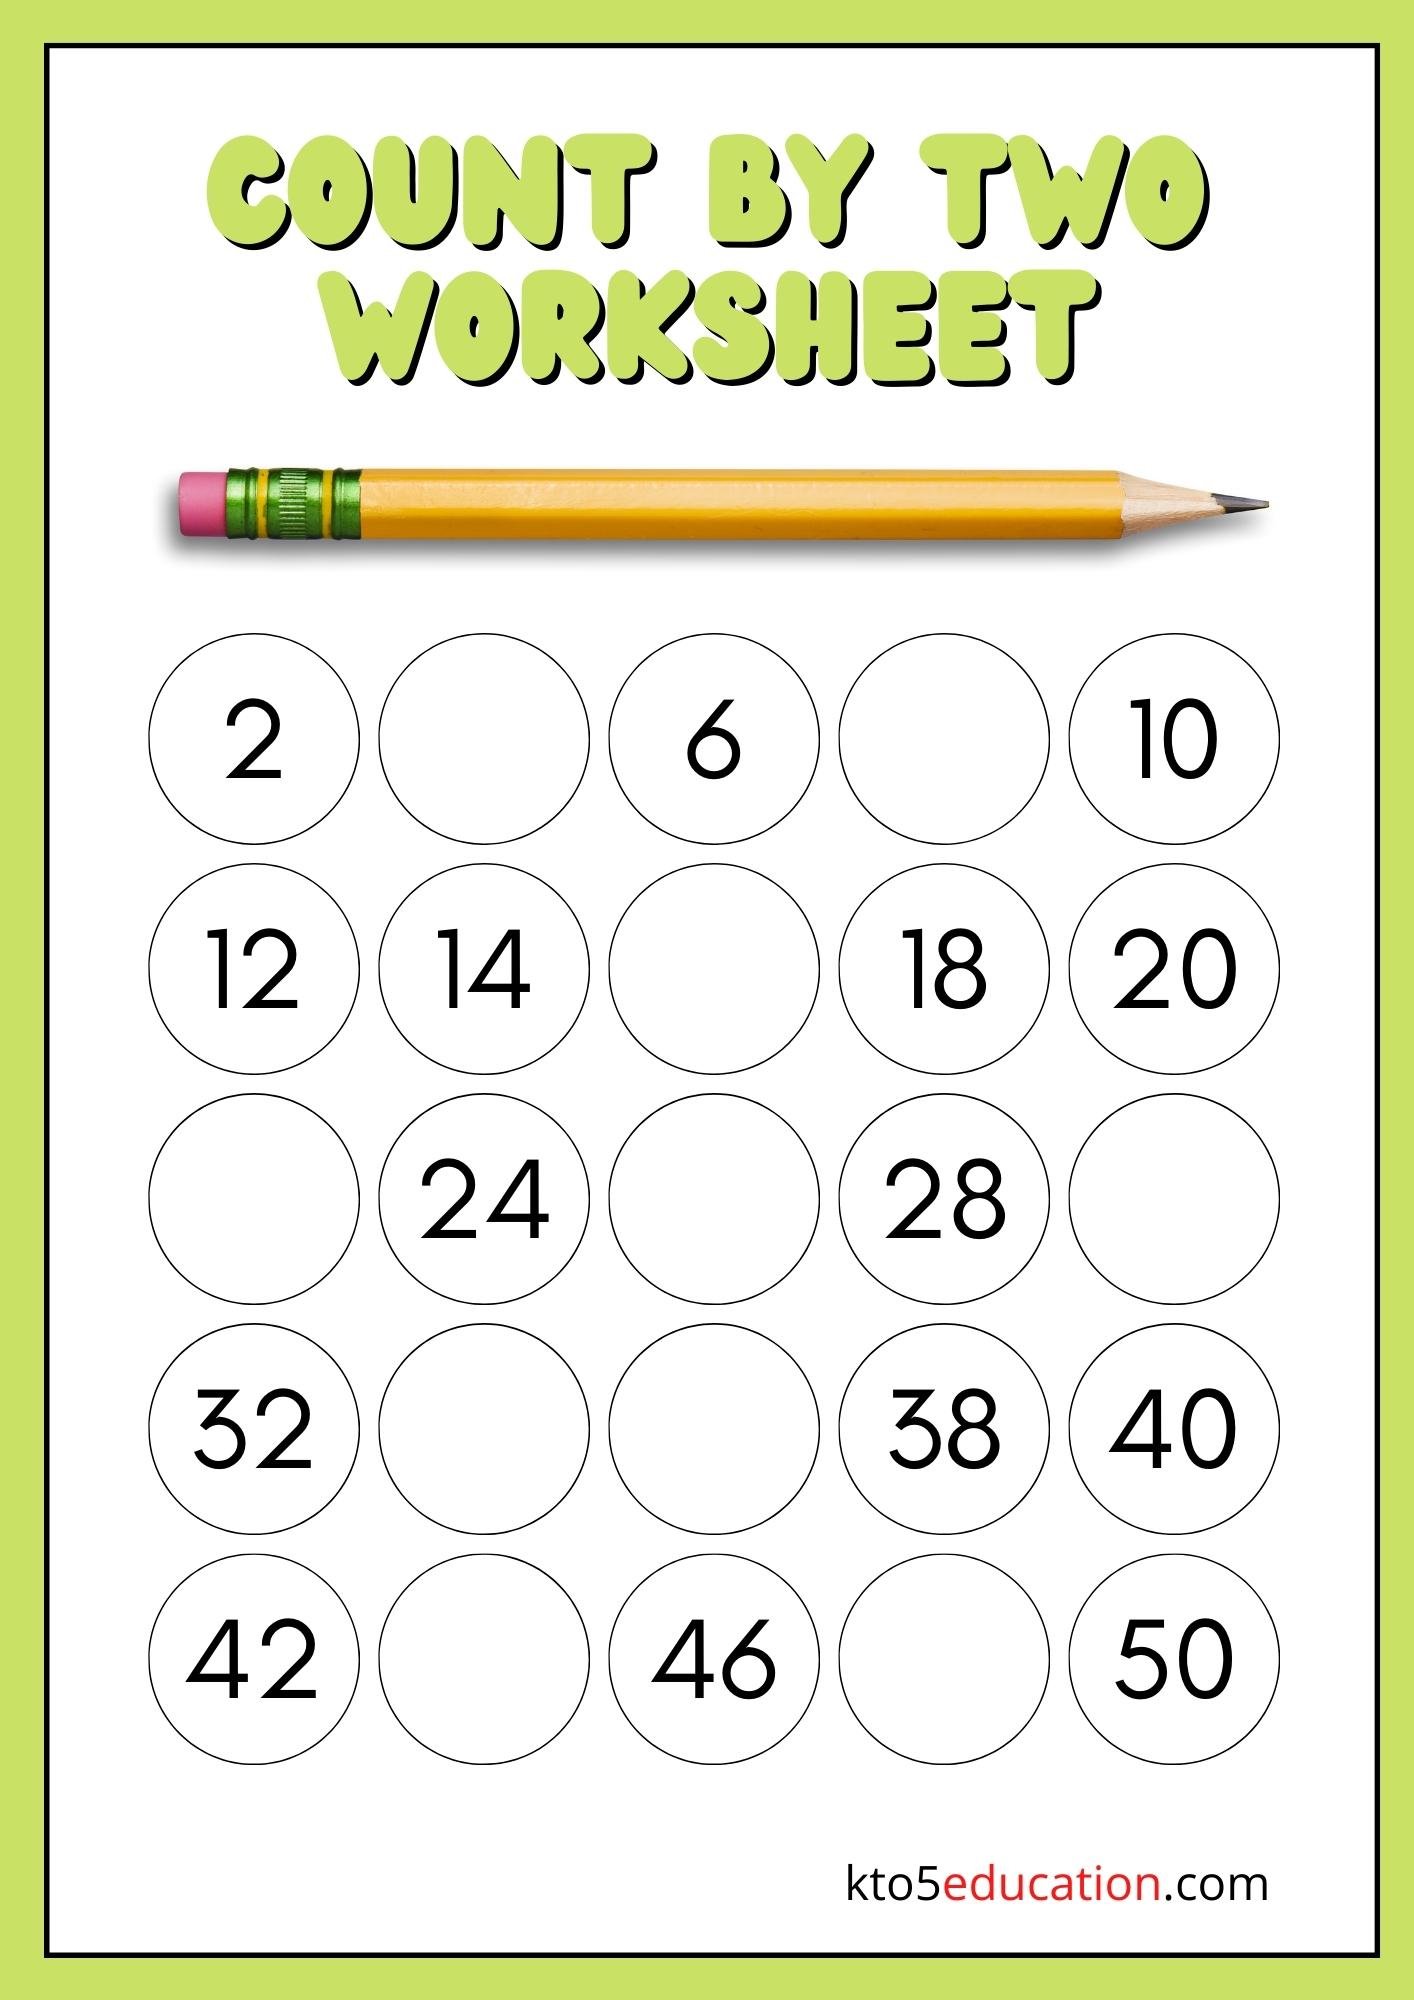 Count By 2 Worksheet